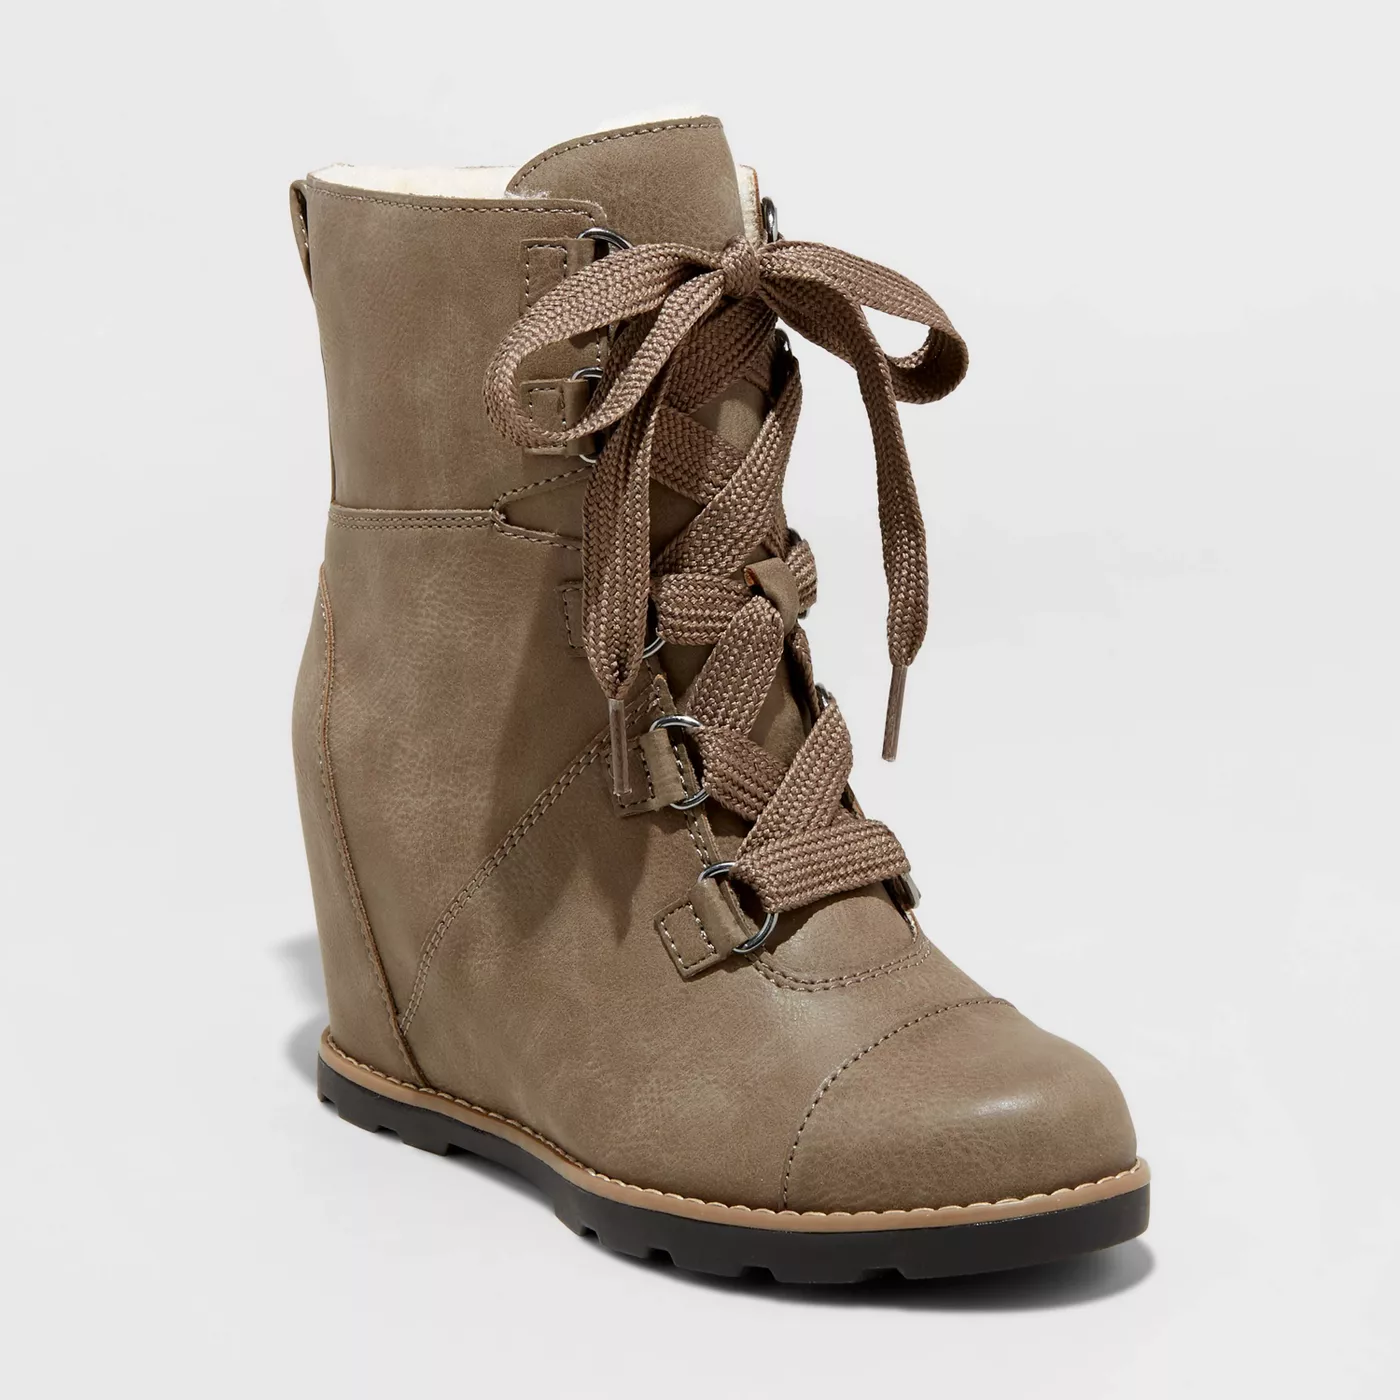 Women's Katherine Faux Leather Lace-Up Wedge Boots - Universal Thread™ - image 1 of 3